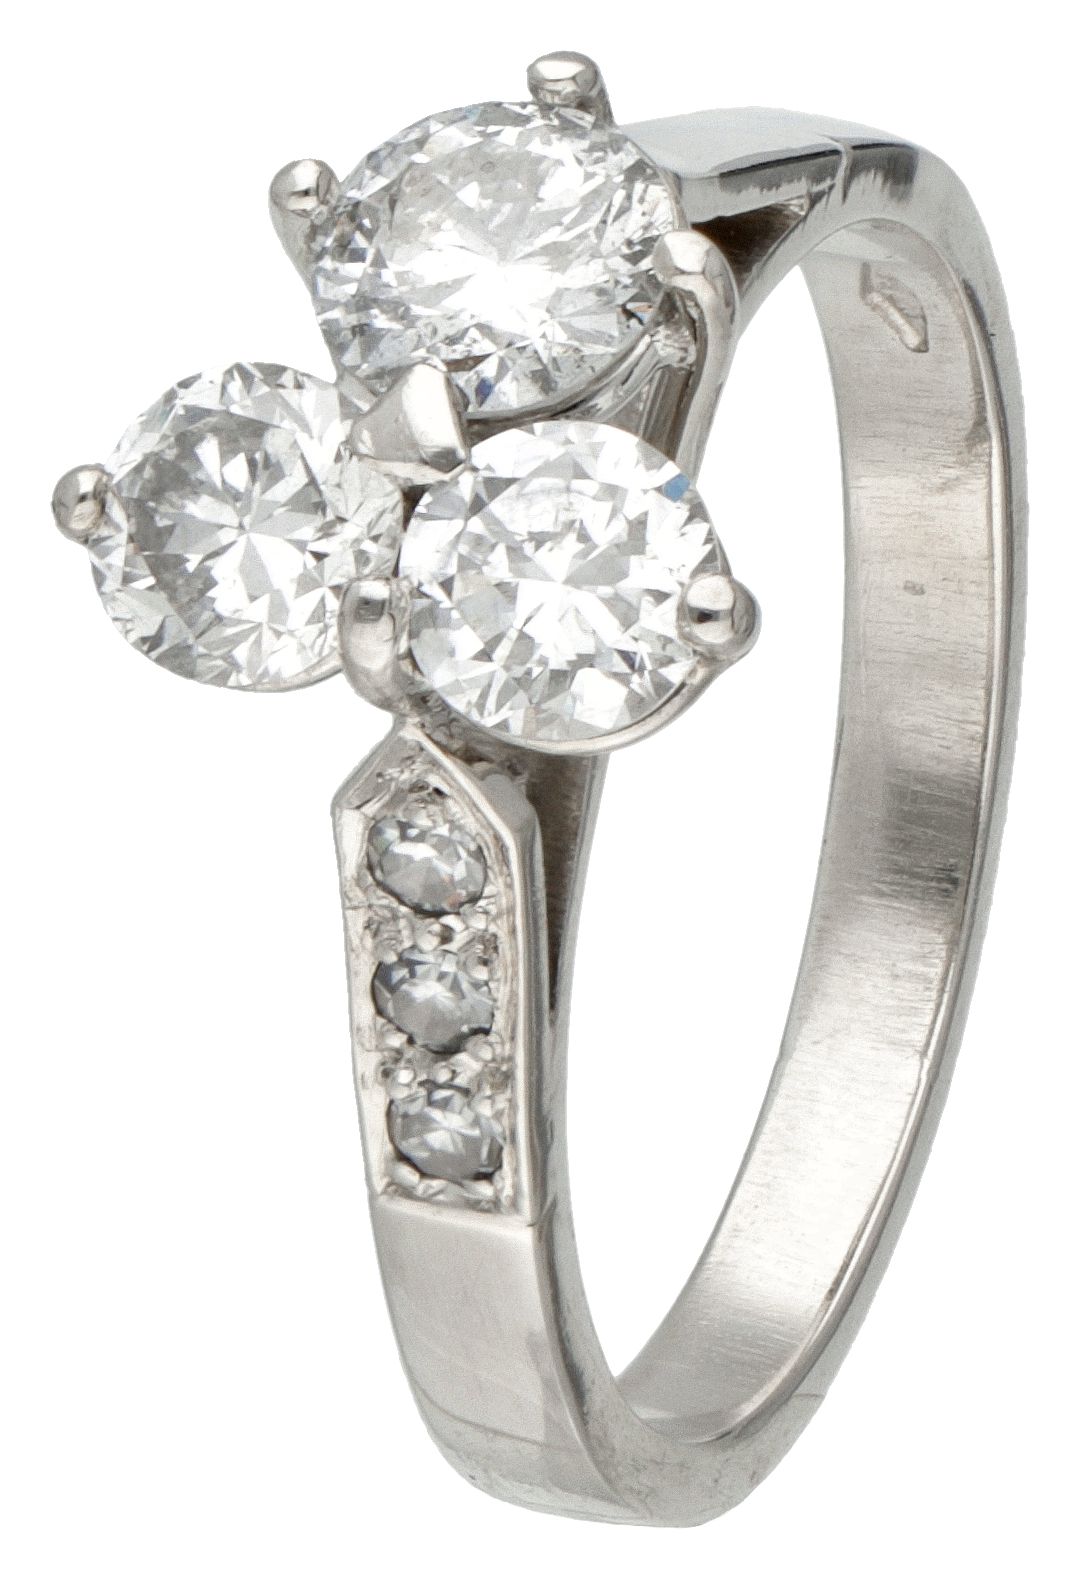 BLA 10K. White gold four-leaf clover ring set with approx. 1.00 ct. Diamond. Con&hellip;